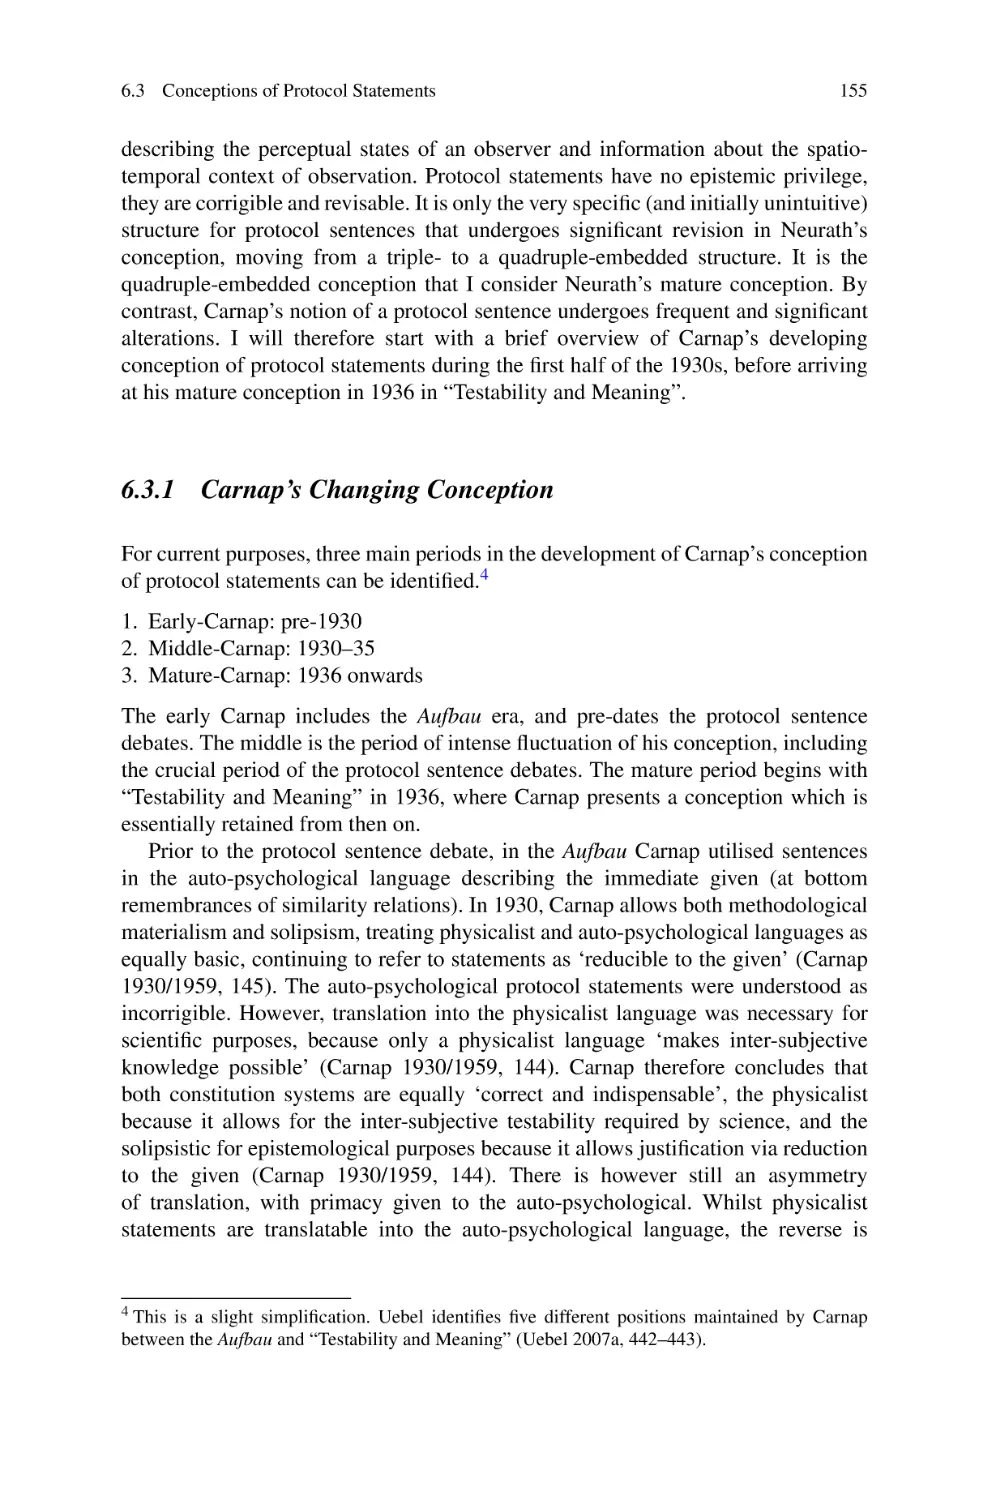 6.3.1 Carnap's Changing Conception